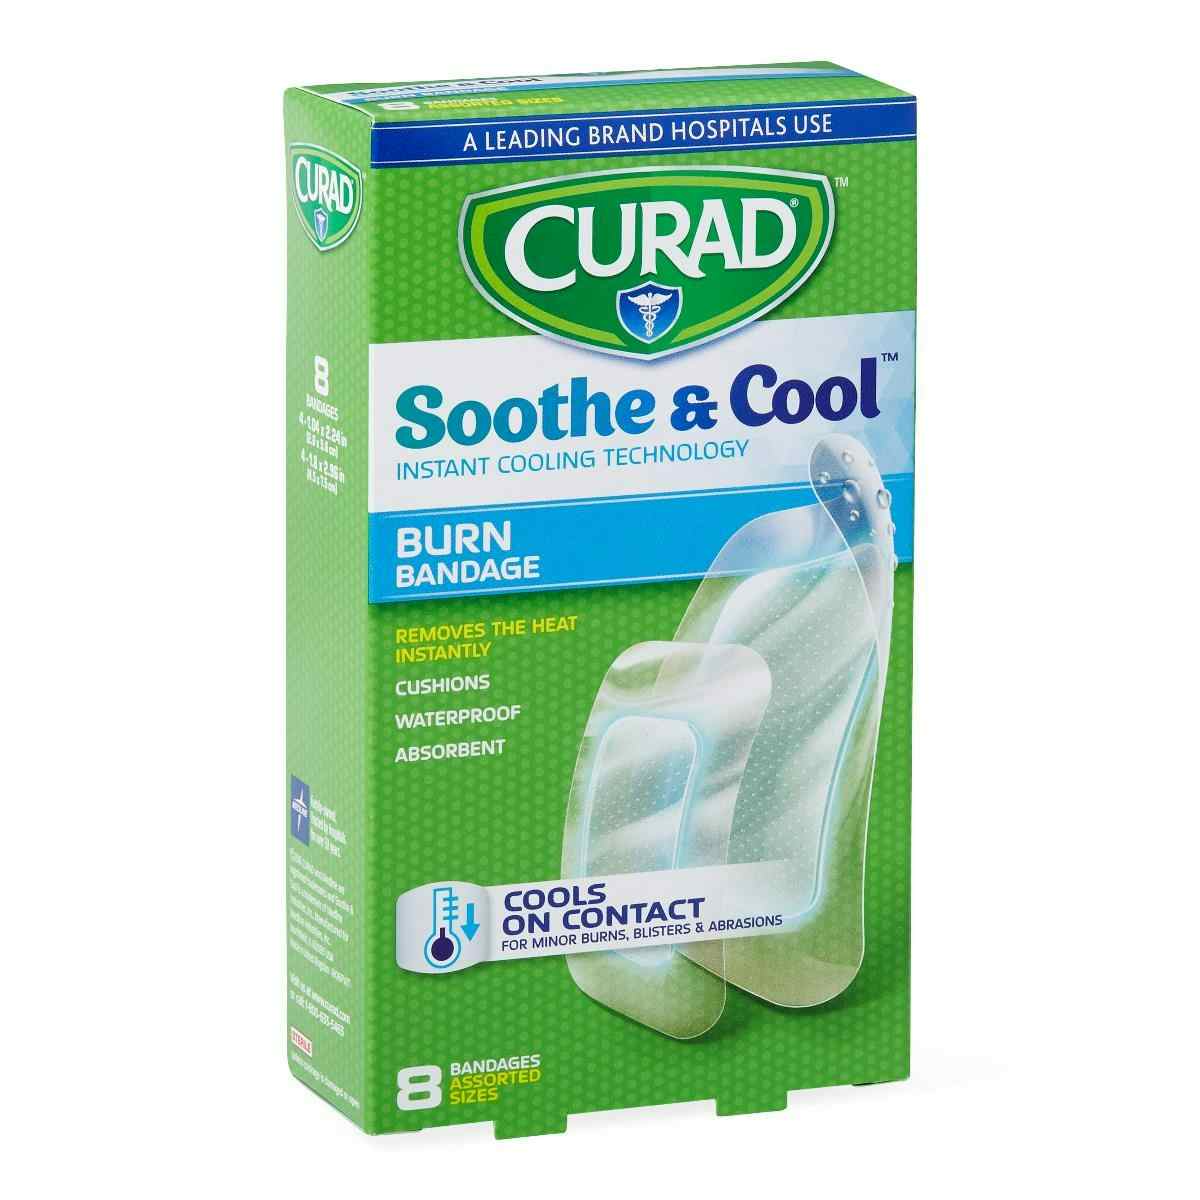 Curad Soothe and Cool Burn Bandage, Assorted Sizes, CUR5236V1H, Box of 8 